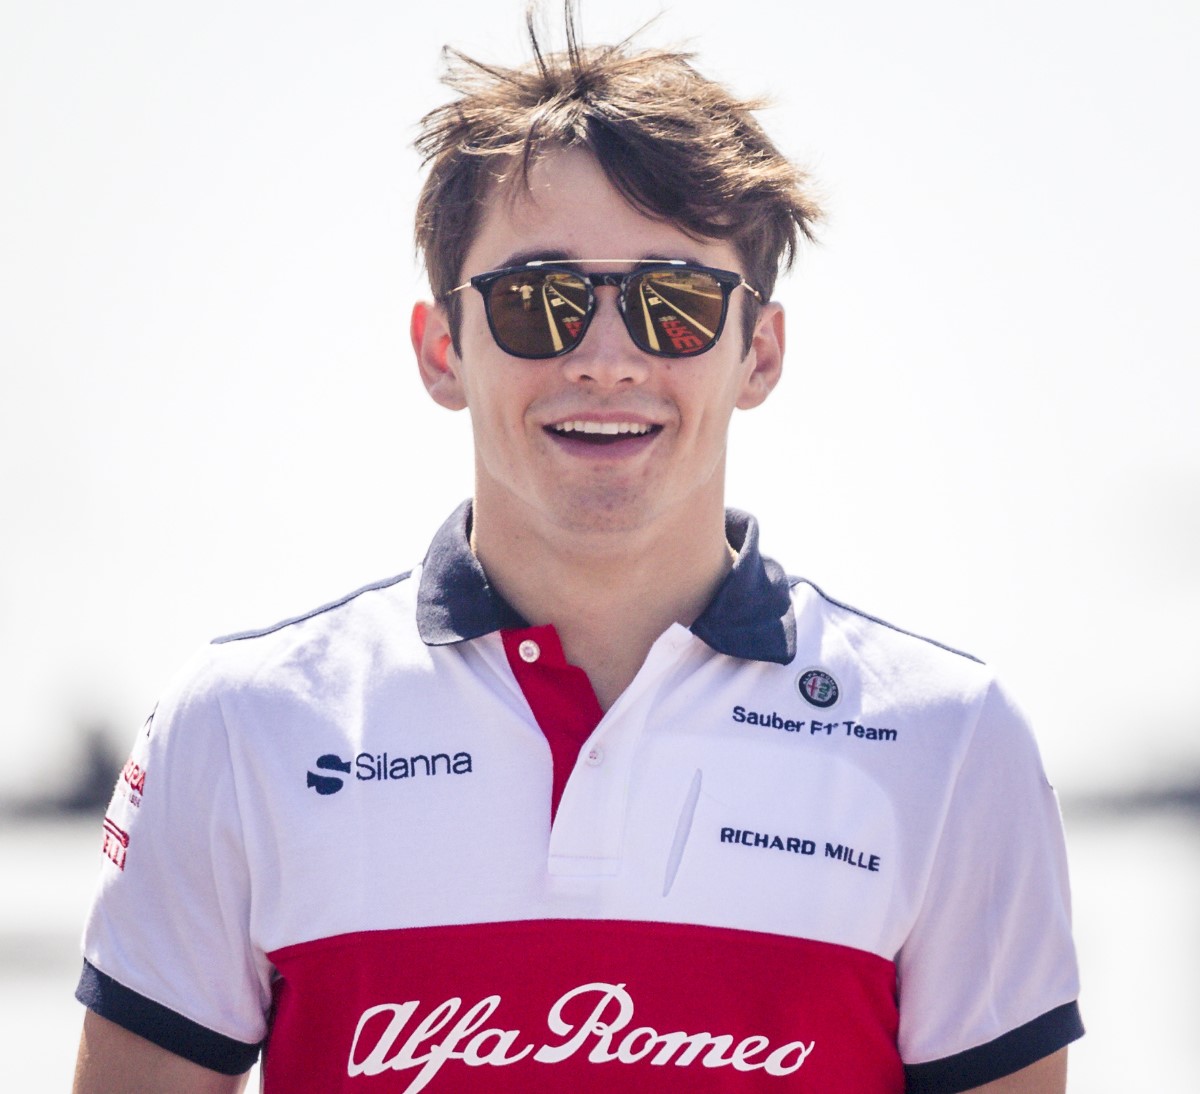 Leclerc (above) will be in the Ferrari, Gasly in the Red Bull